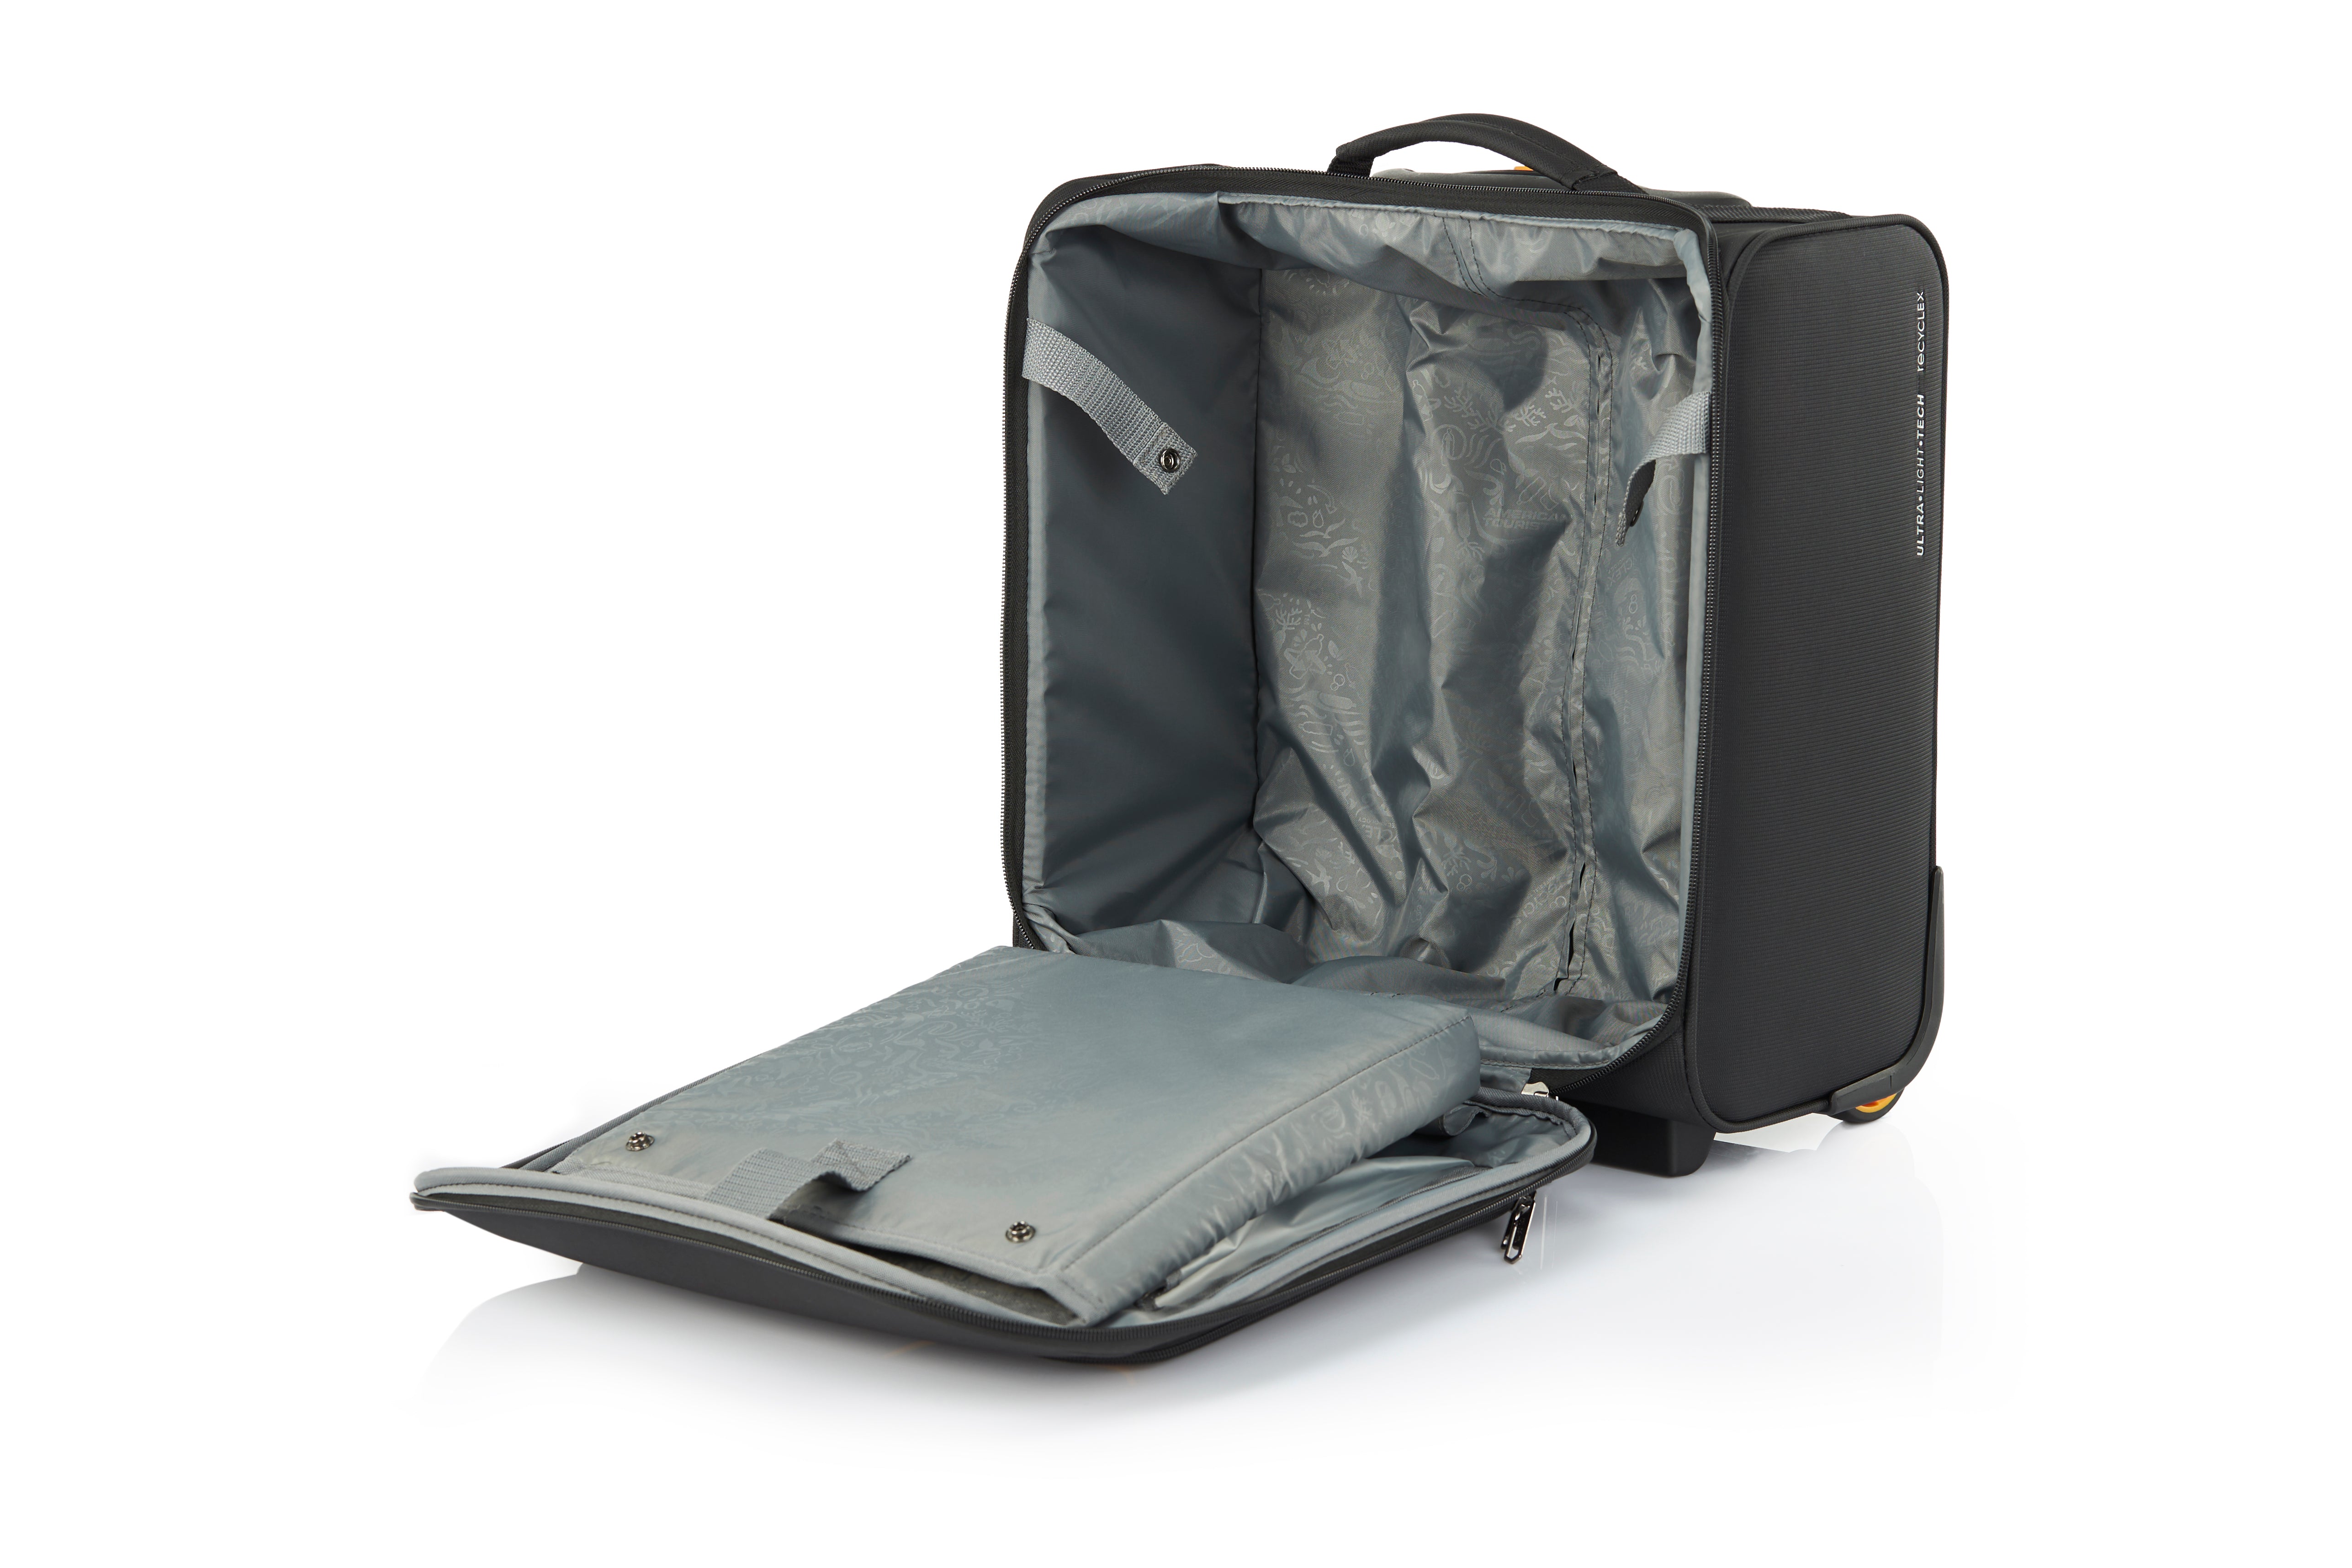 American Tourister - Applite ECO Underseater Suitcase - Black/Must-7